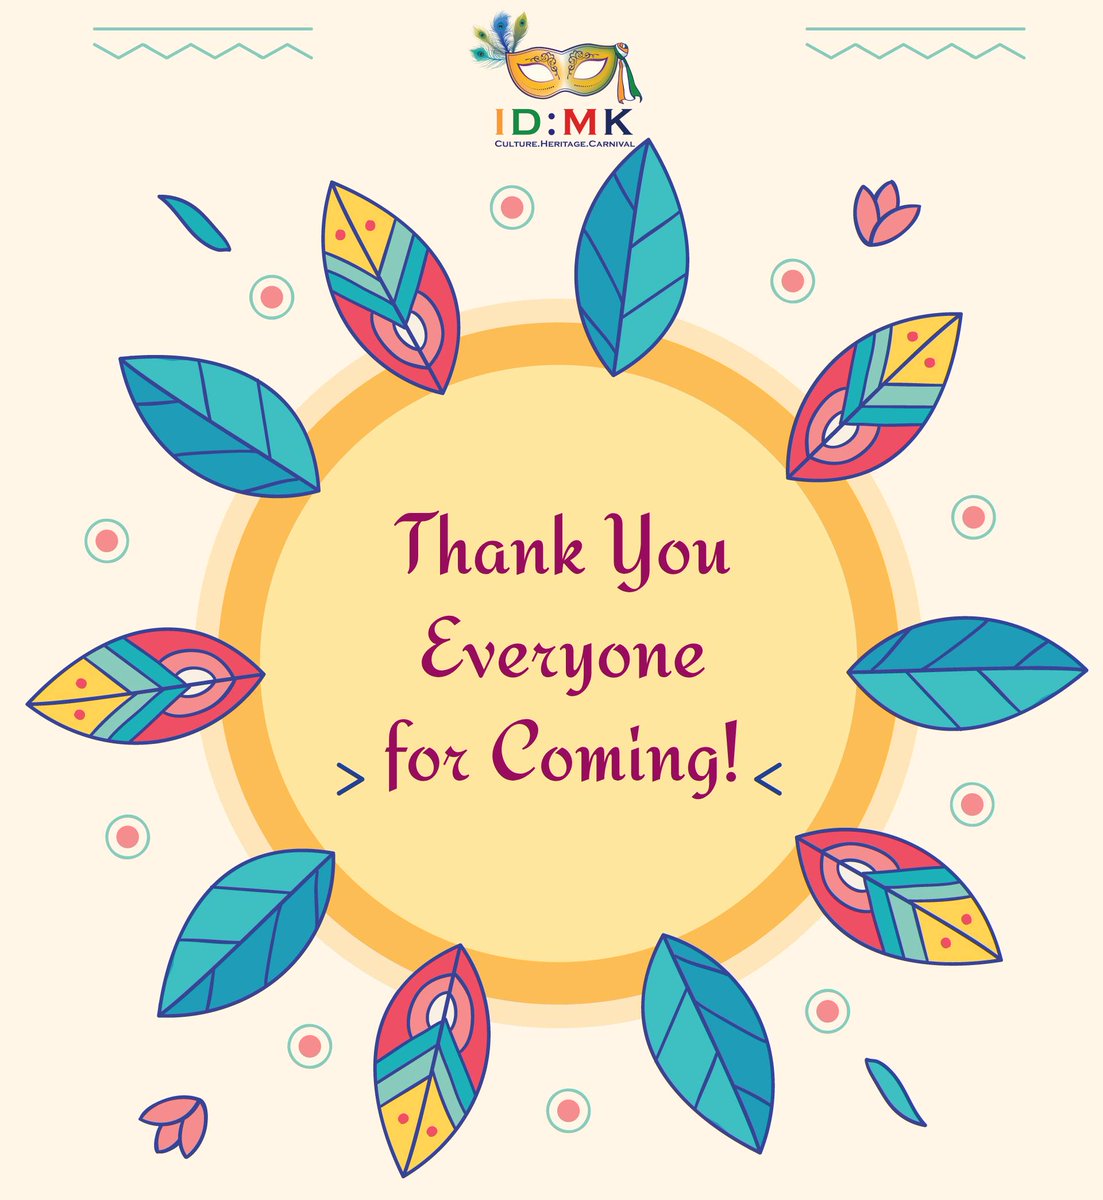 We extend our heartfelt gratitude for your presence & participation at the event. Your support & enthusiasm have contributed to the success of this meaningful occasion. #idmk2023 #communityevent #indianculture #miltonkeynes